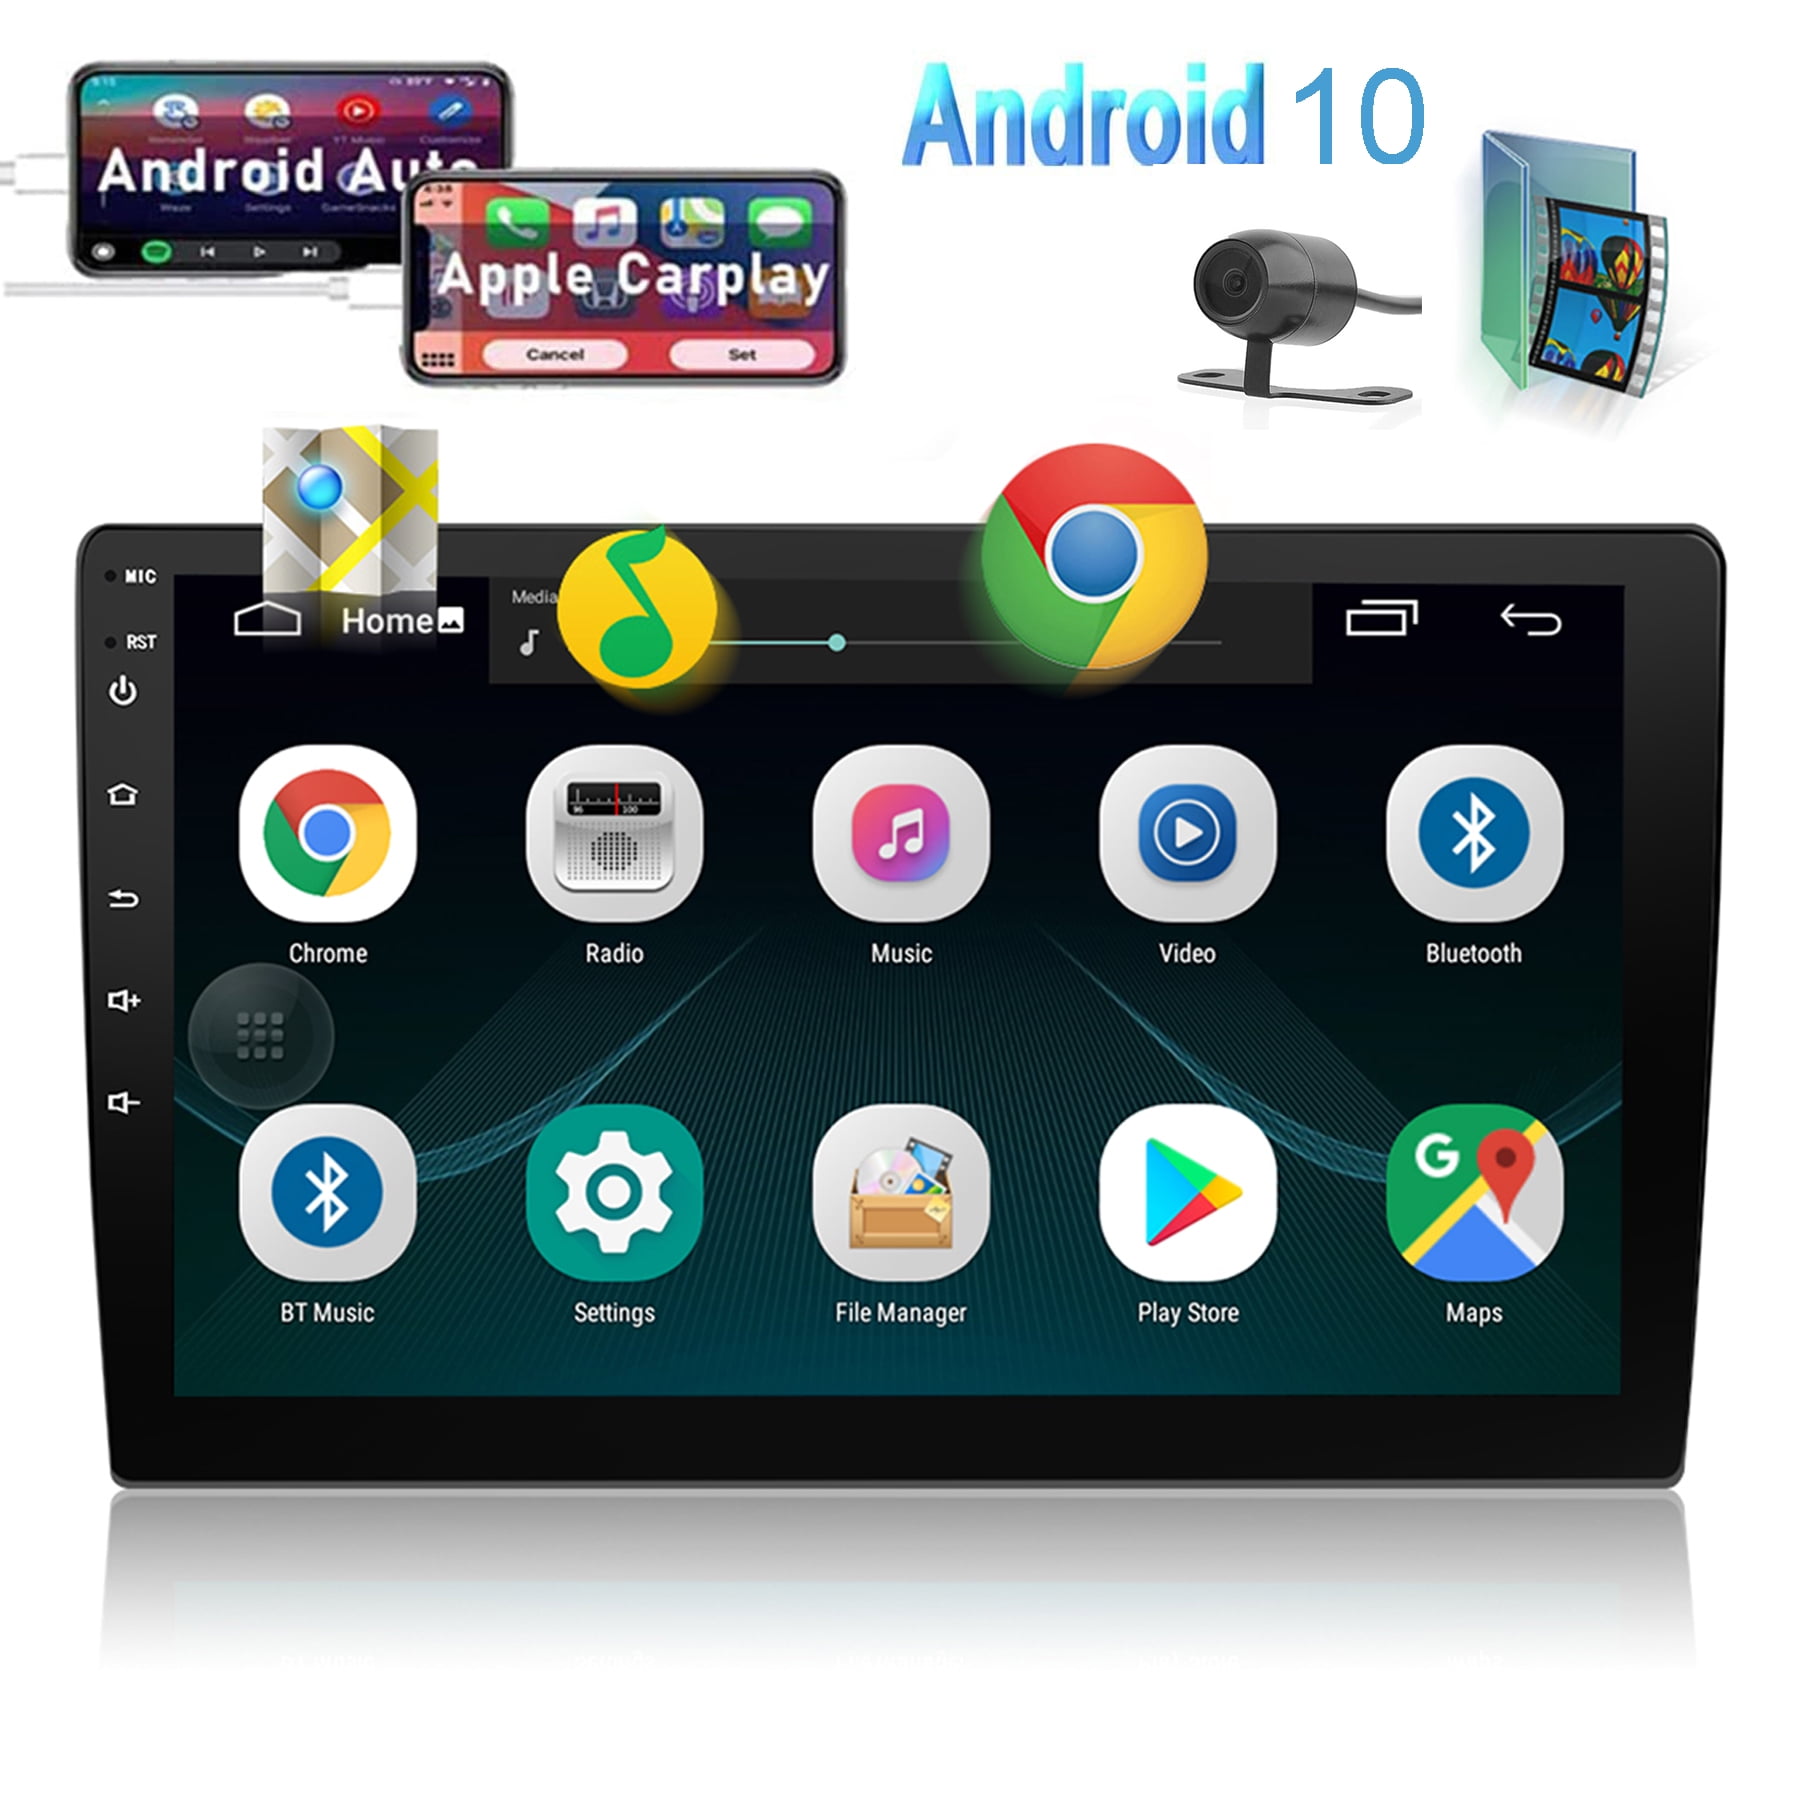 At søge tilflugt Gennemvæd kompleksitet 10.1 Inch Android 10 Car Stereo with Apple Carplay Double Din Android Auto  Head unit GPS Navigation Touchscreen Car Autoradio Bluetooth WiFi Mirroring  CAM-IN + Free Backup Camera - Walmart.com